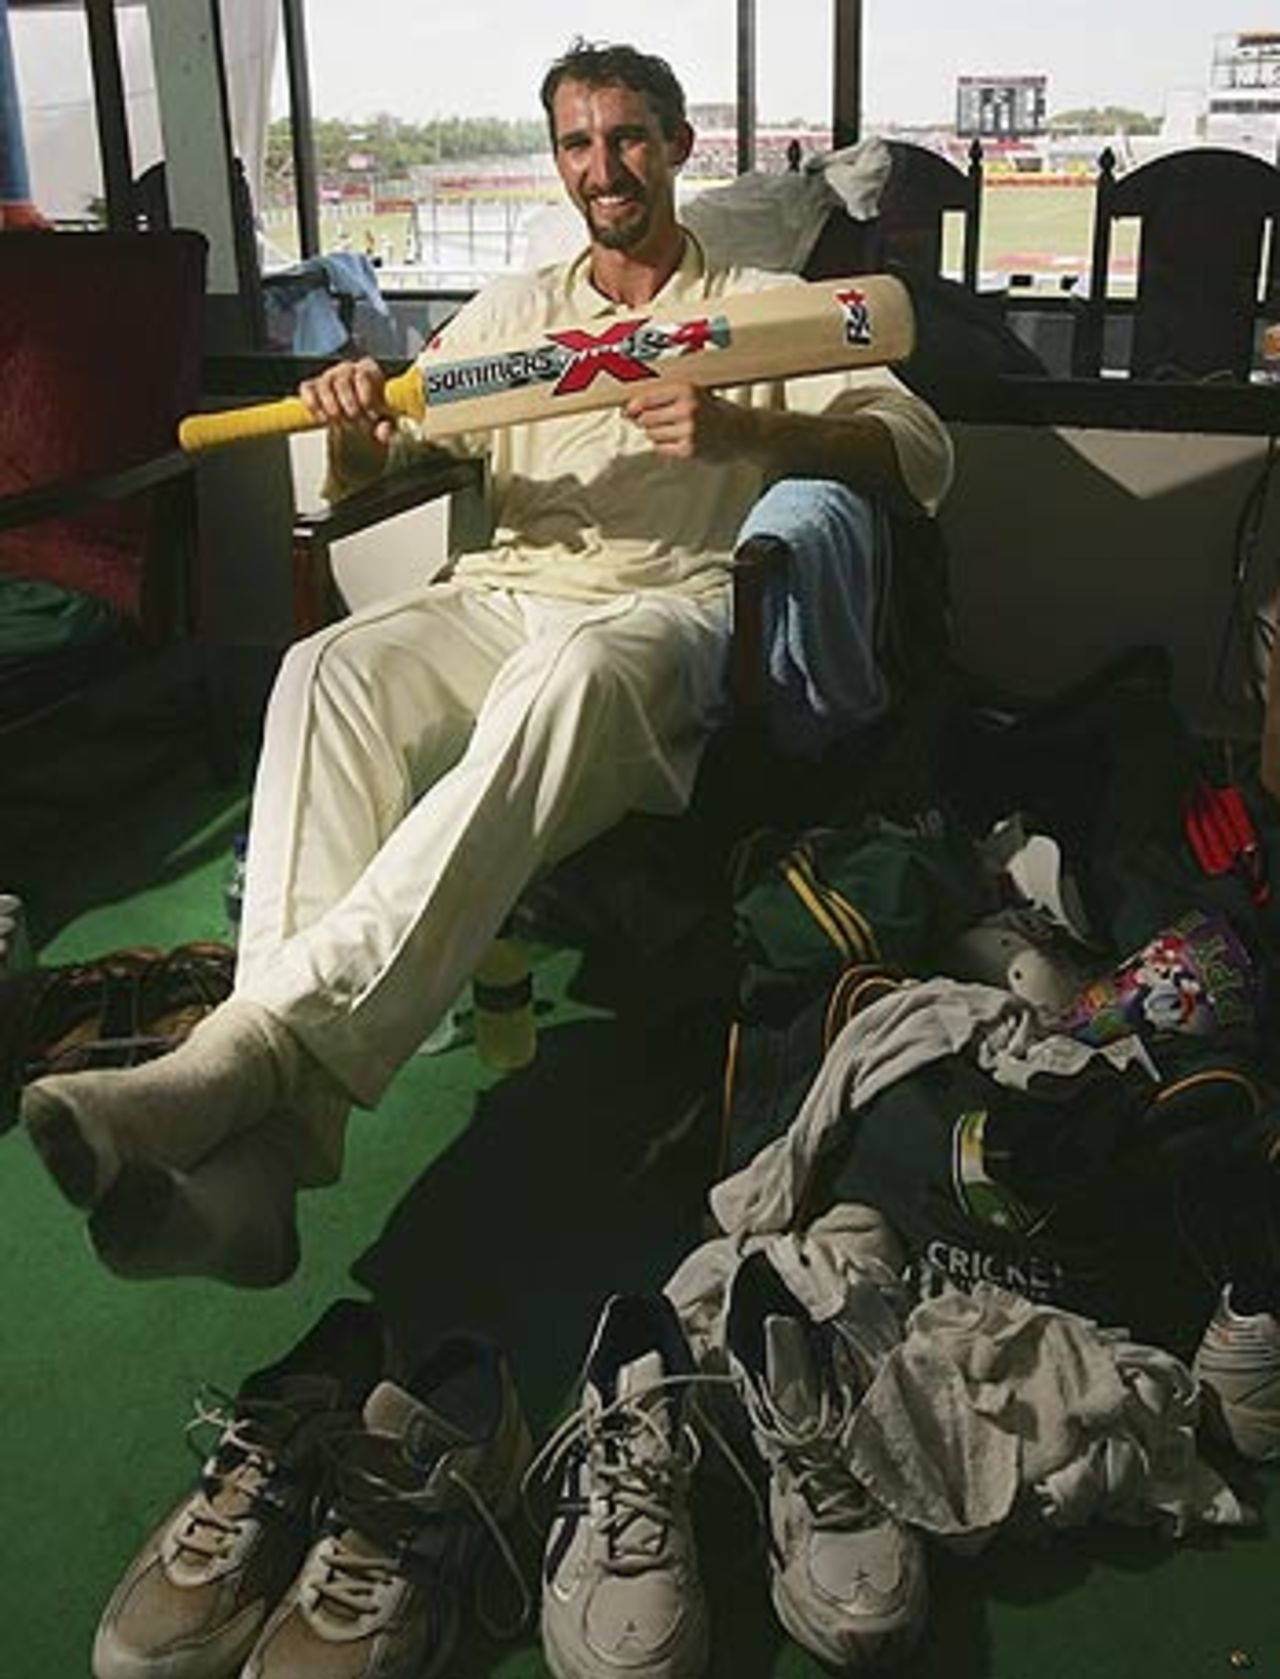 Jason Gillespie cools off in the dressing room after his record-breaking double hundred, Bangladesh v Australia, 2nd Test, Chittagong, 4th day, April 19 2006